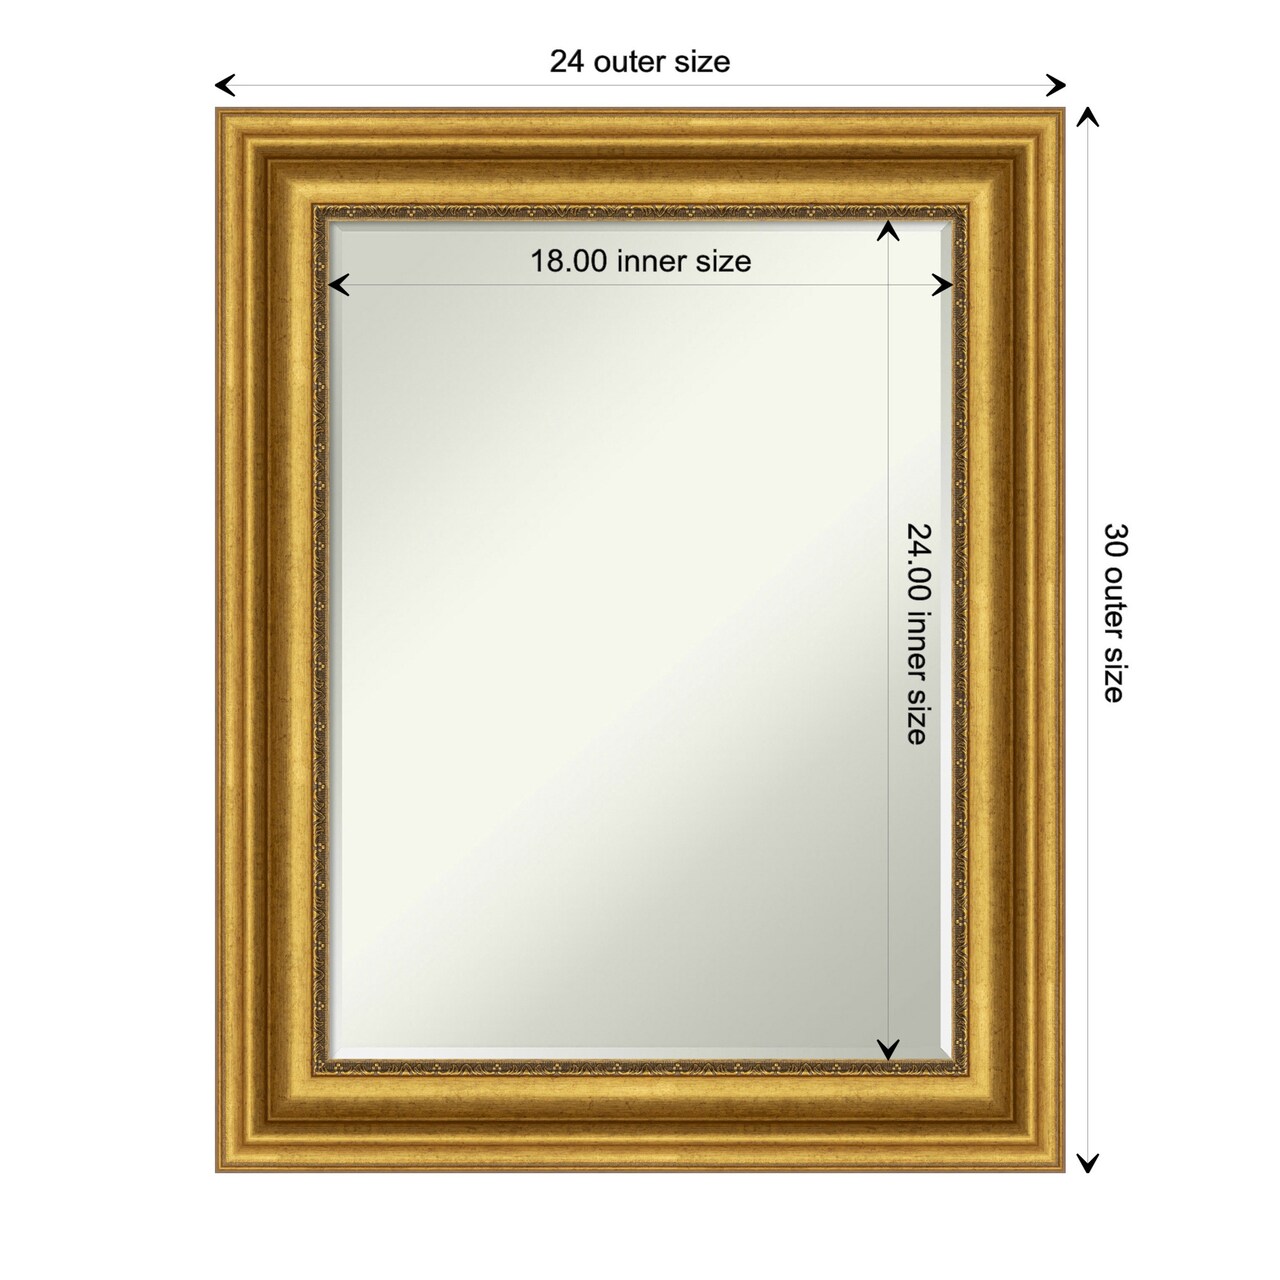 Petite Bevel Wall Mirror, Parlor Frame